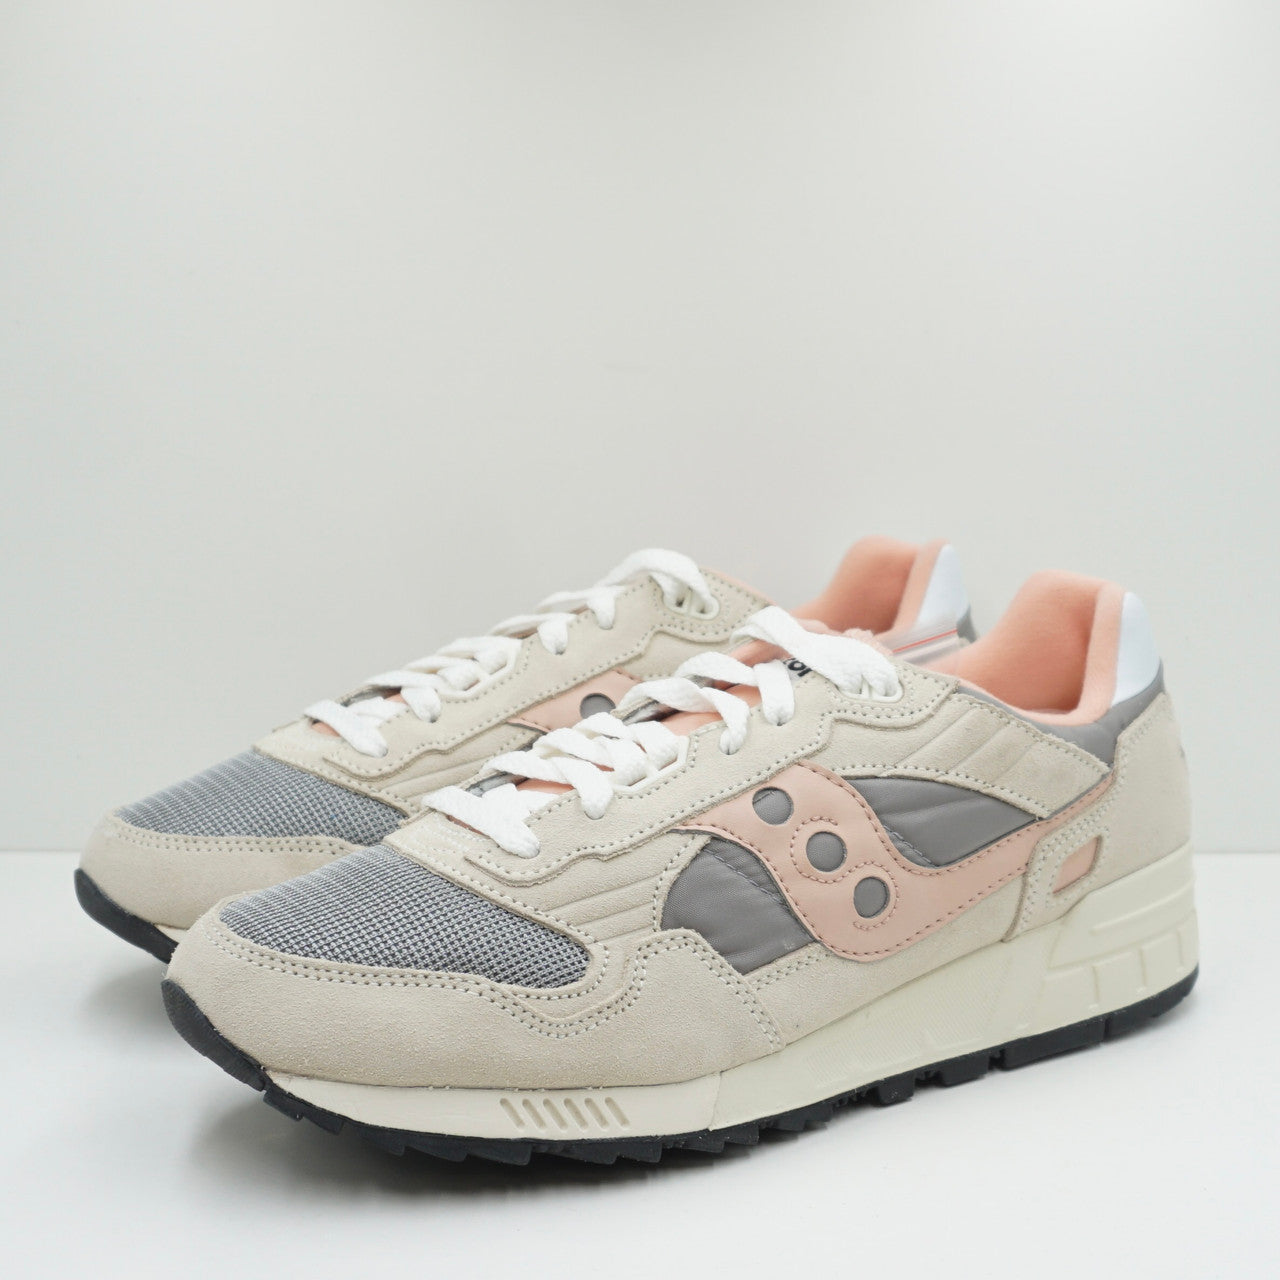 Saucony Shadow 5000 Vintage Off White